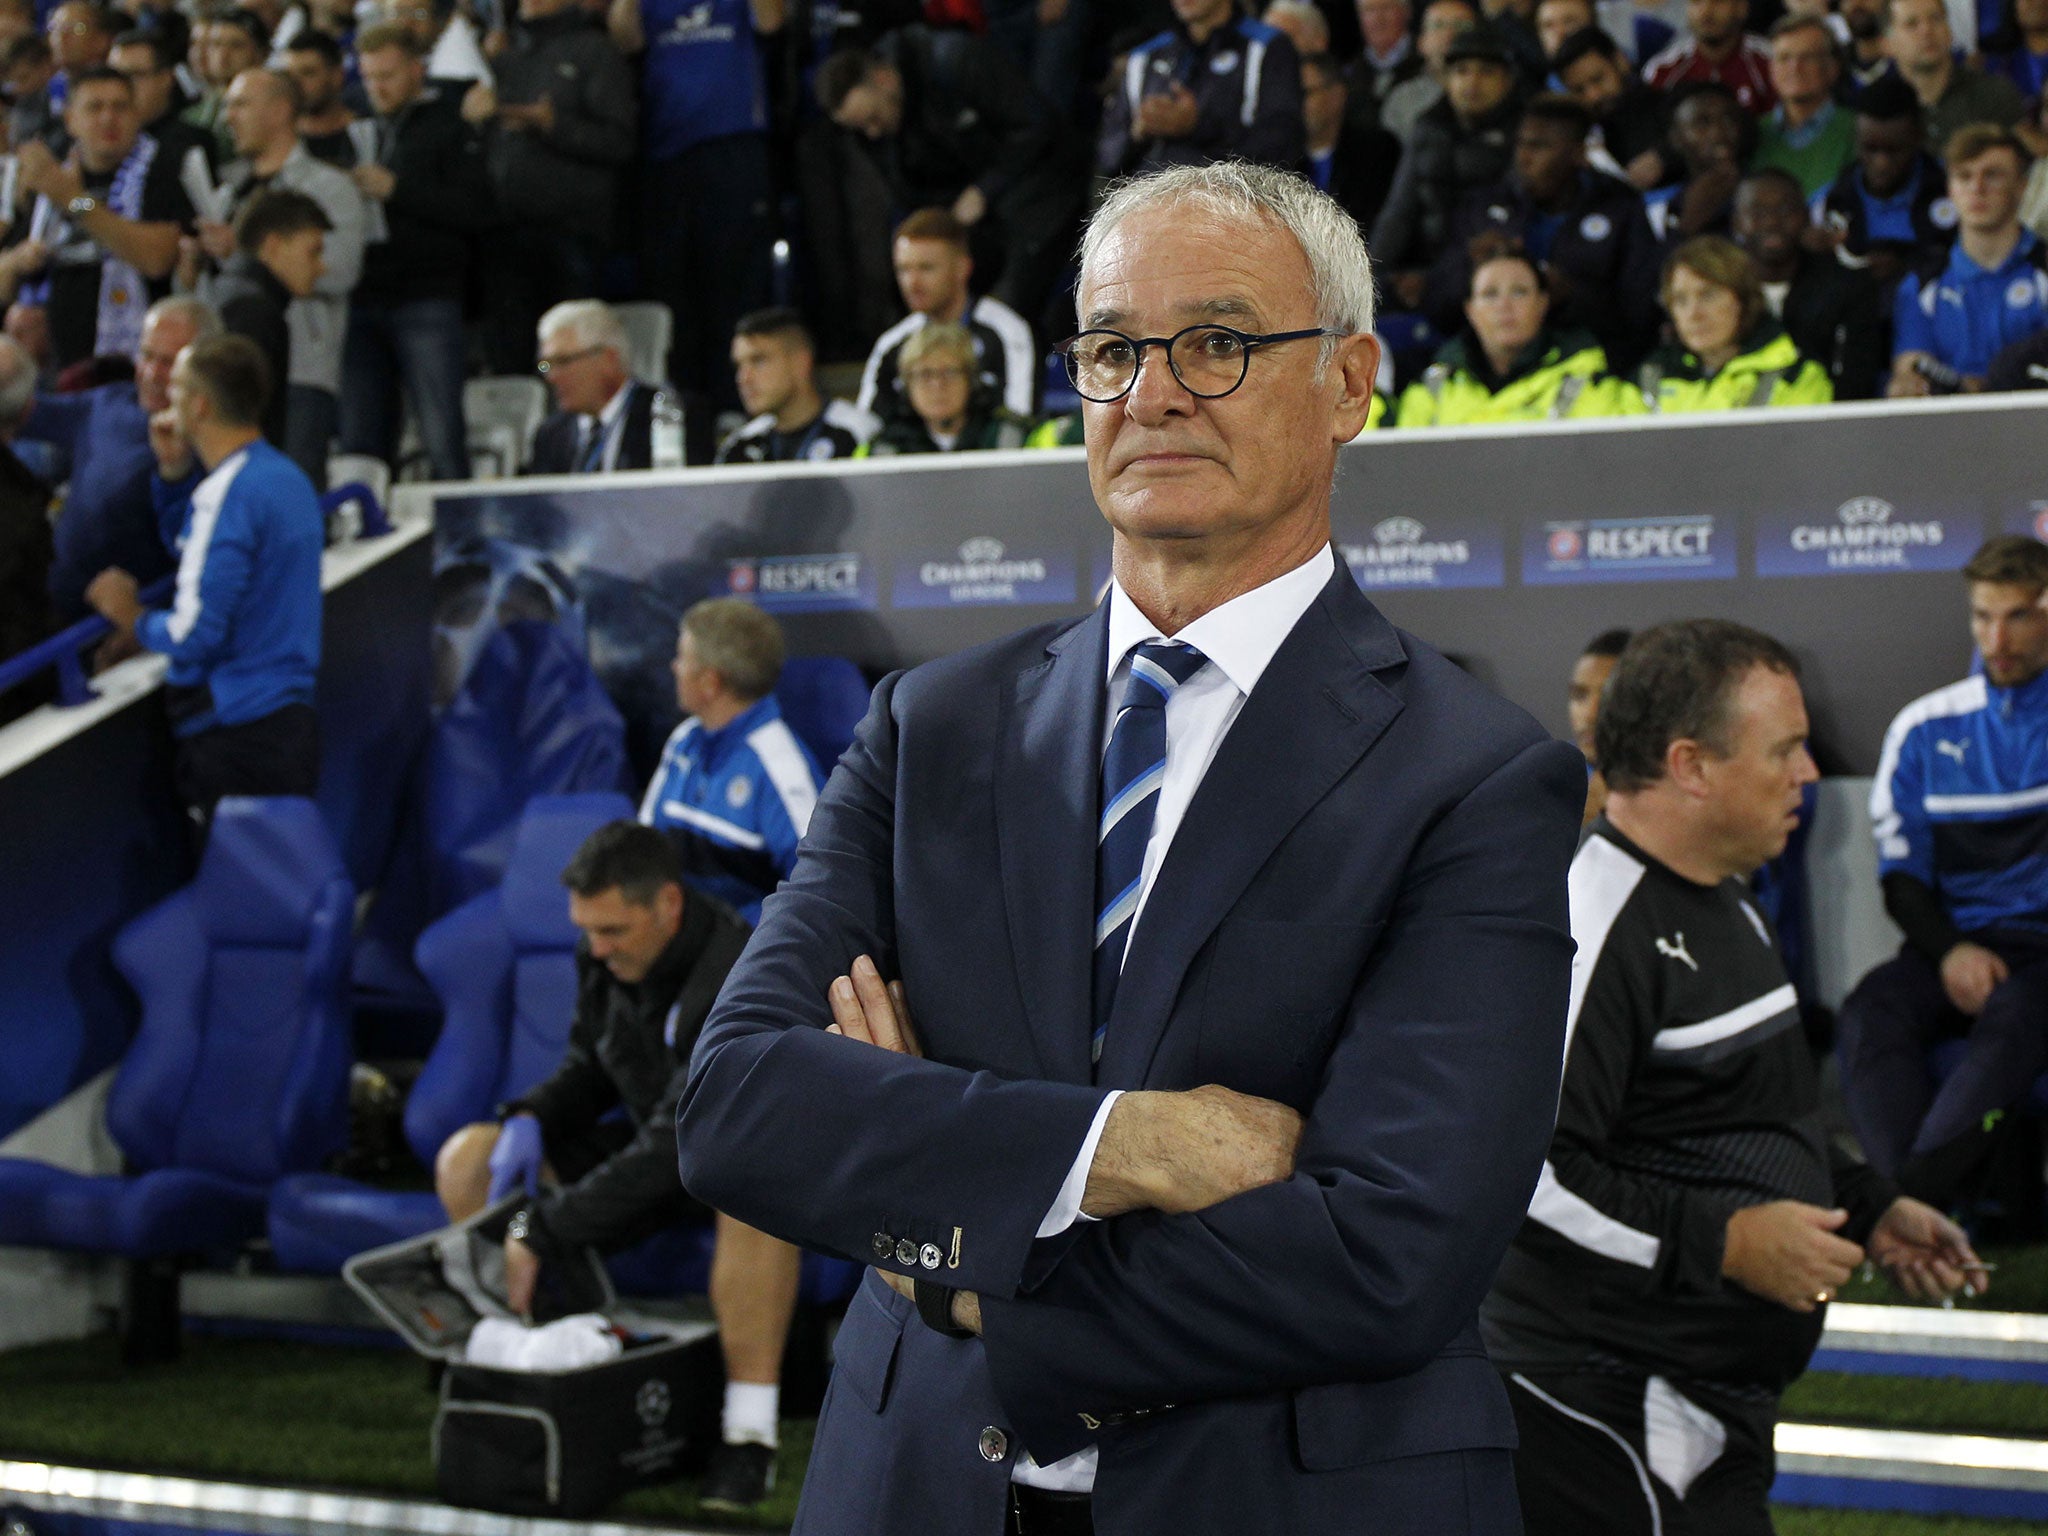 Claudio Ranieri has admitted his side face fresh challenges